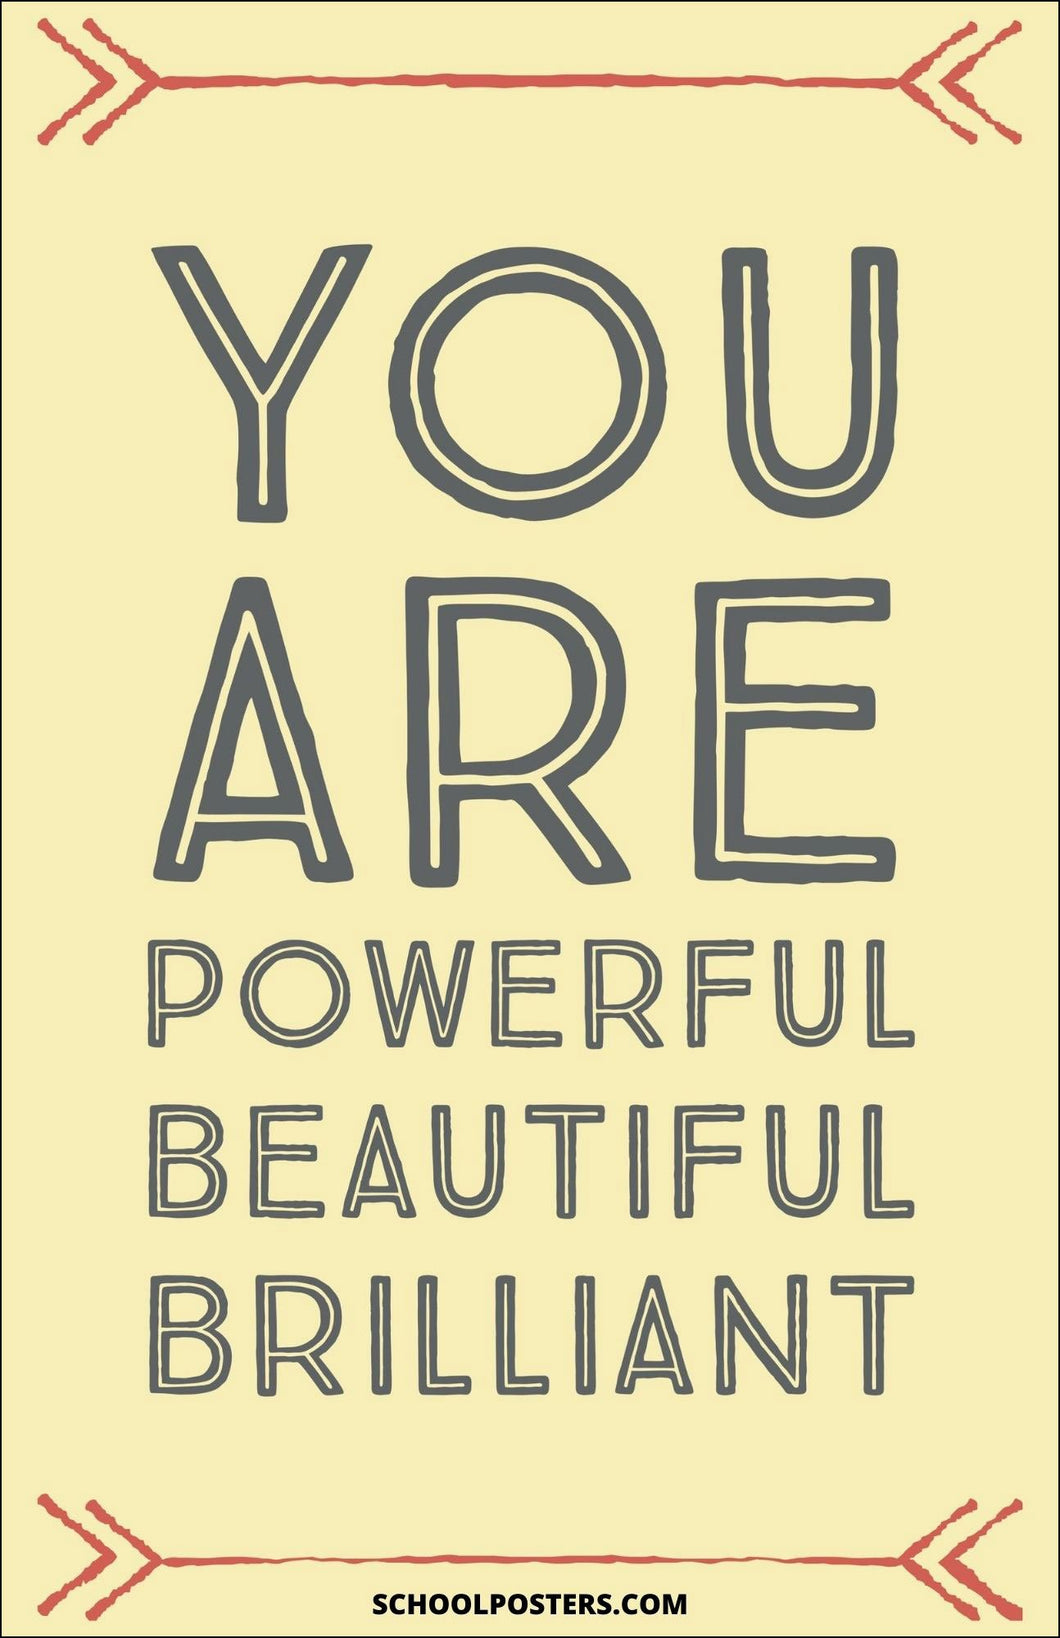 You Are Powerful Beautiful Brilliant Poster